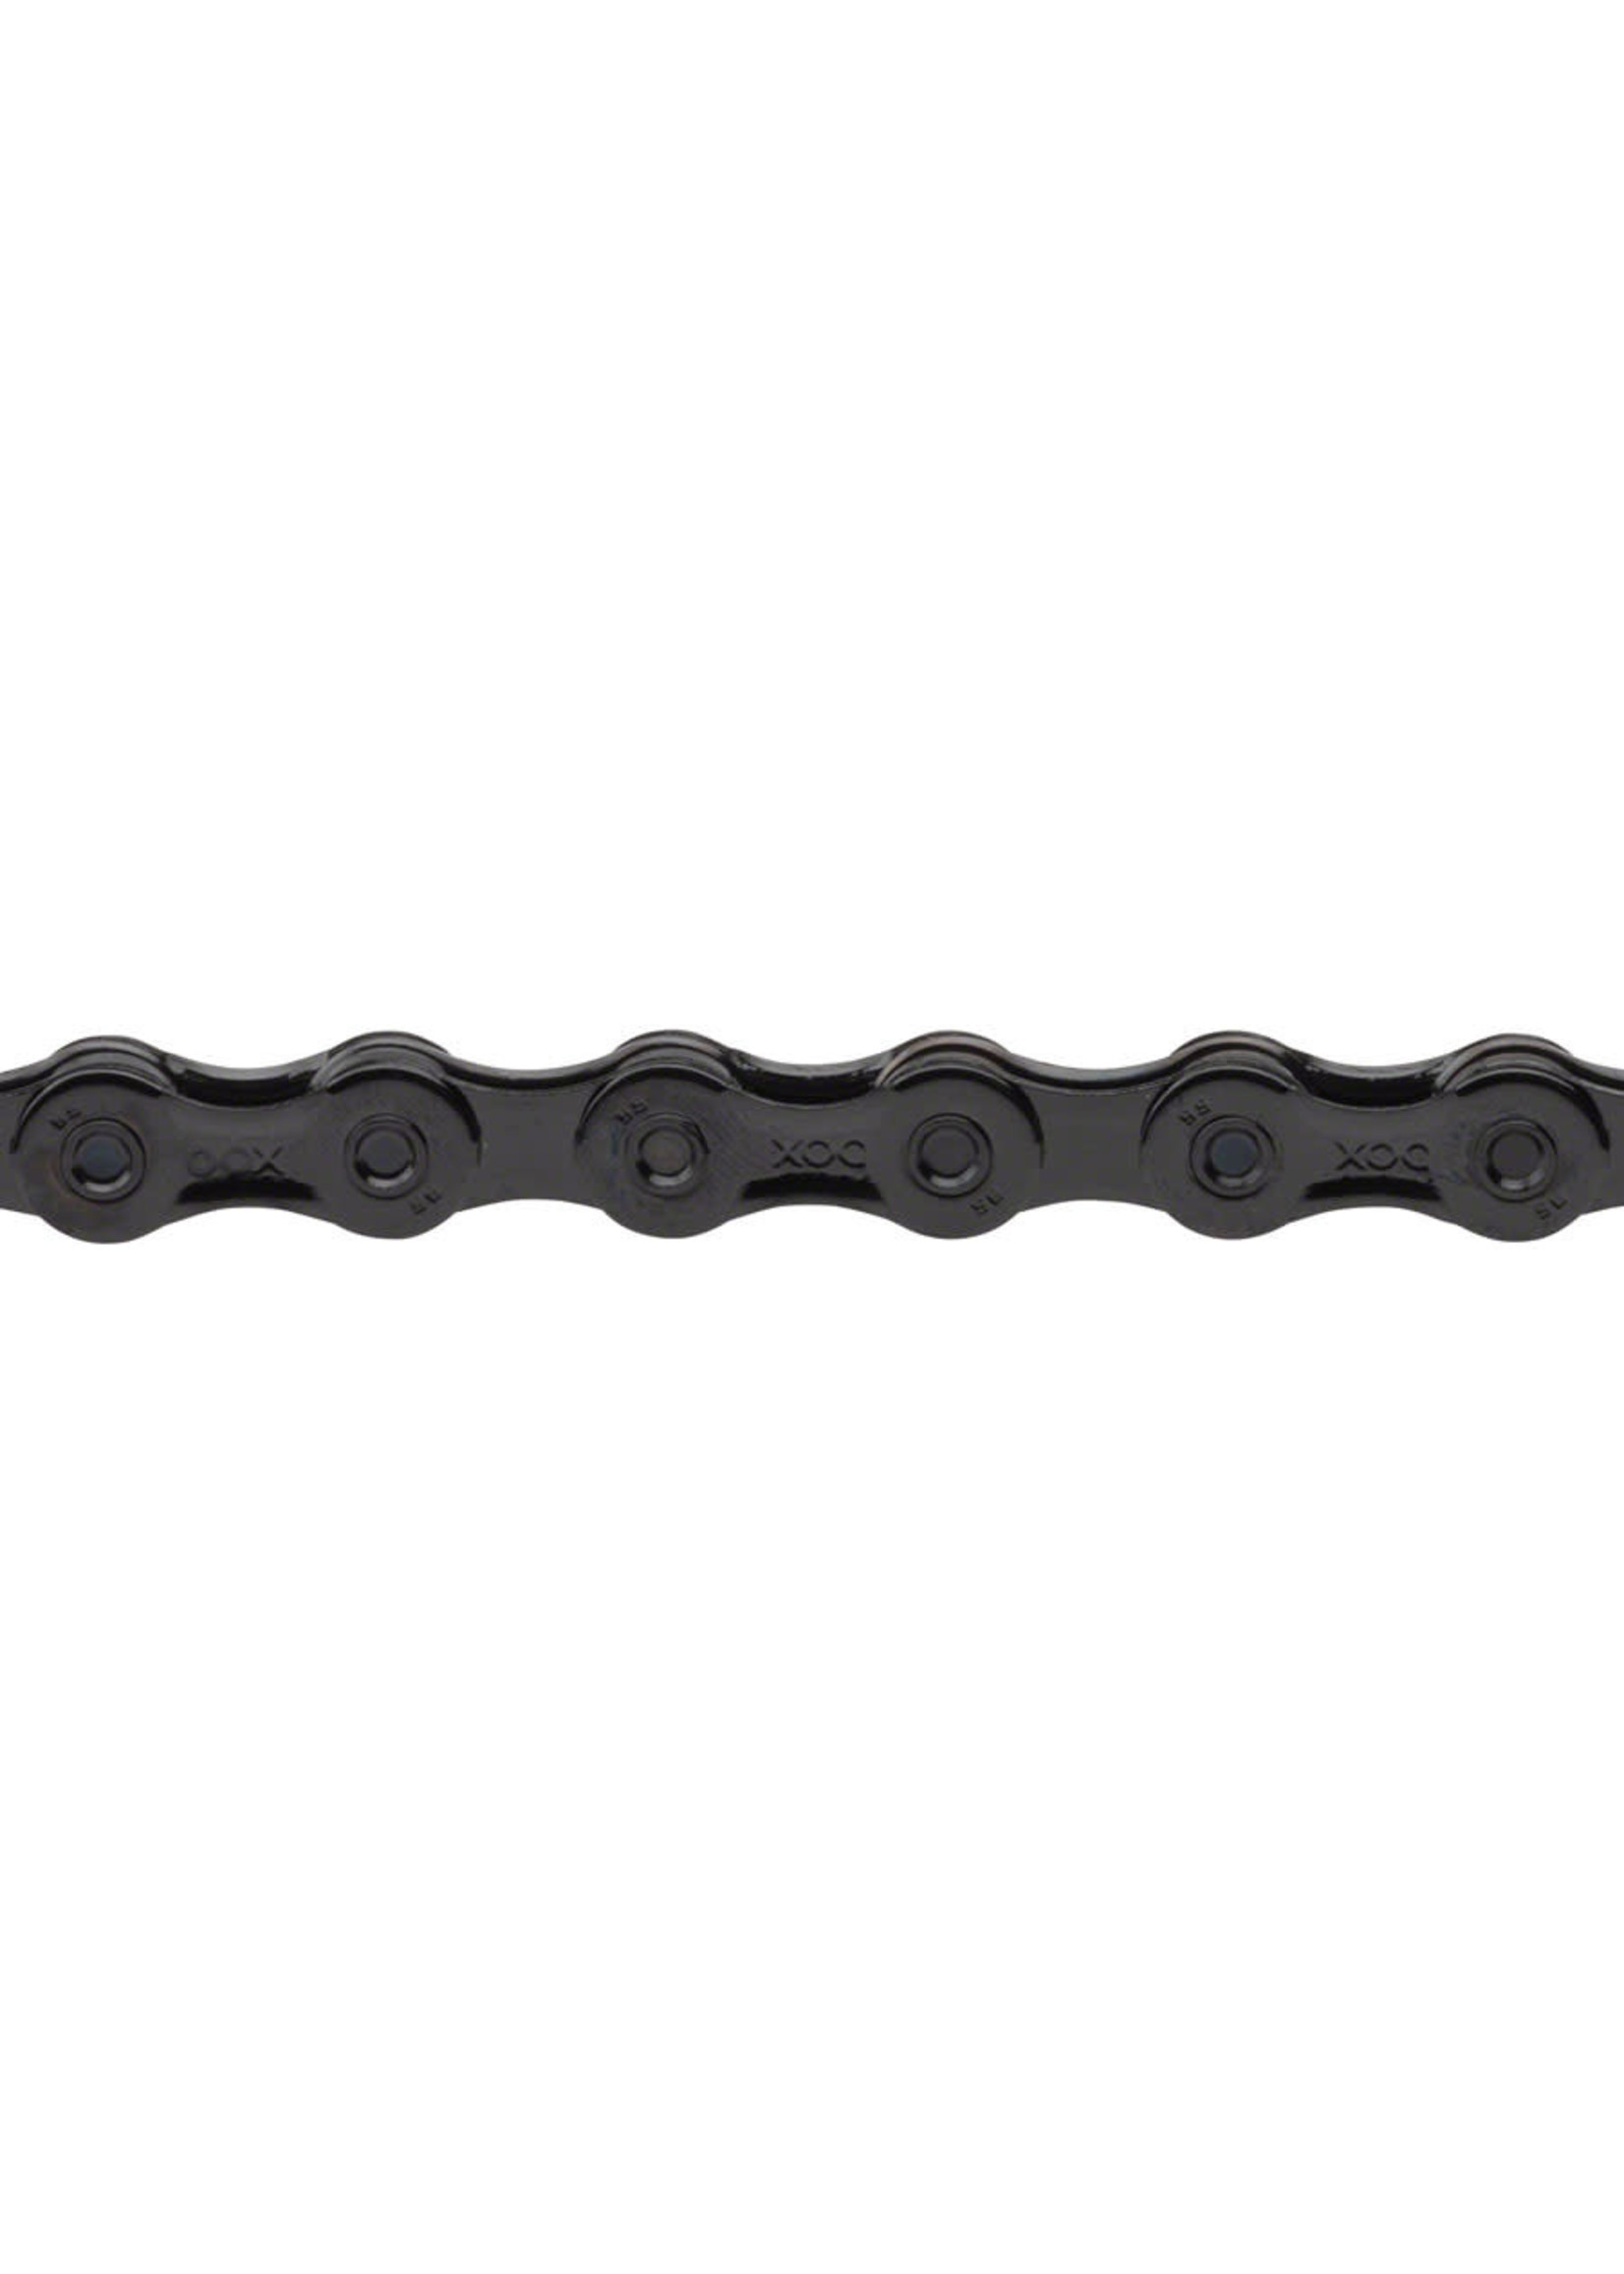 Box Components BOX One Prime 9 Chain - 9-Speed 126 Links DLC Black